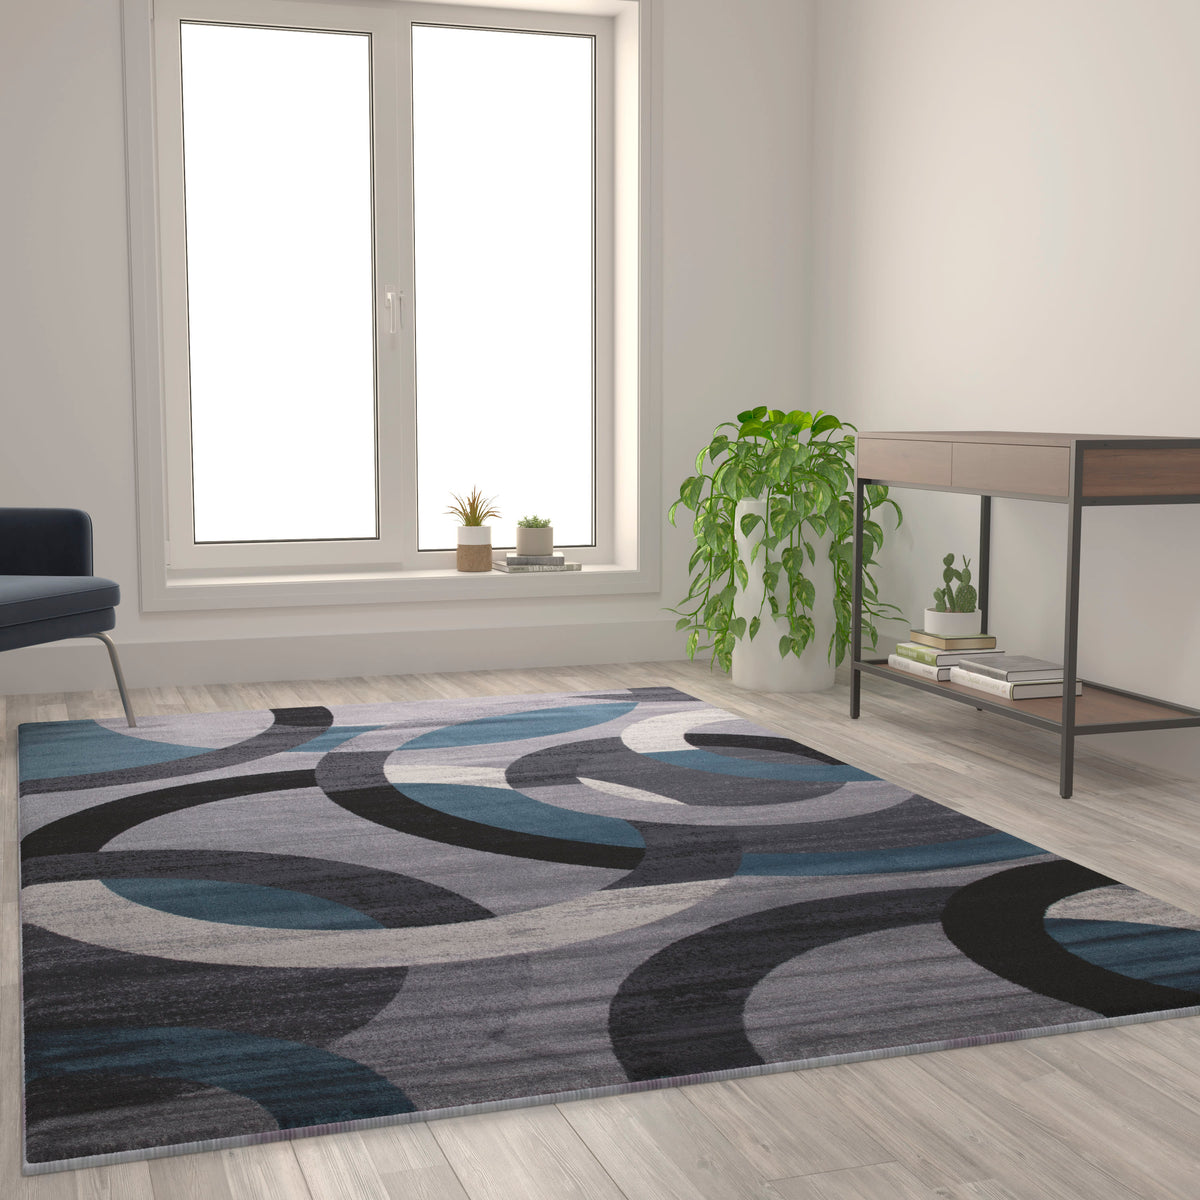 Blue,6' x 9' |#| Modern Geometric Design Area Rug in Blue, Gray, and White - 6' x 9'